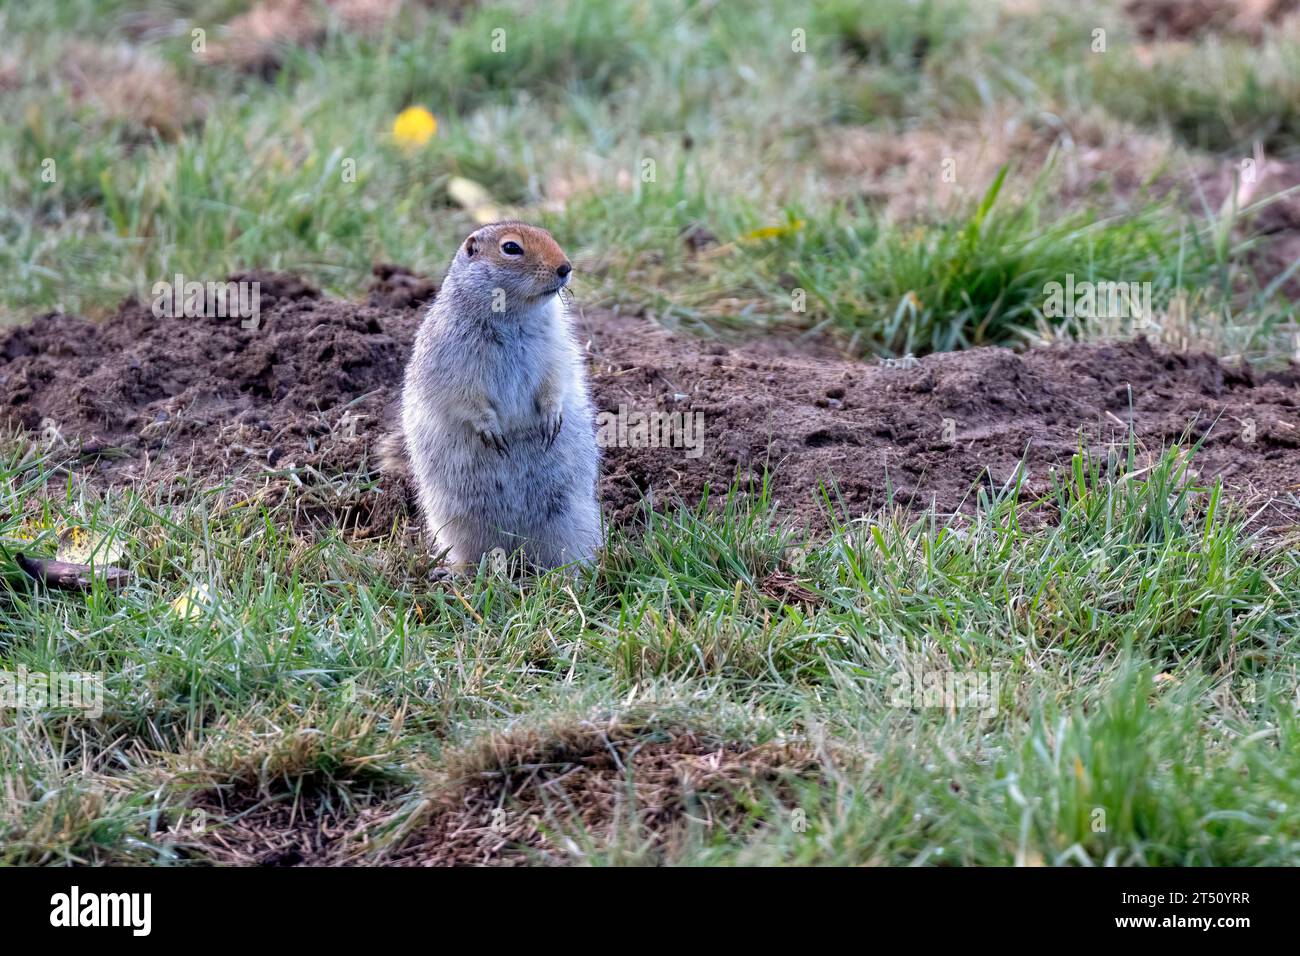 A nervous Arctic Ground Squirrel watching the surroundings near Whitehorse, Yukon, Canada. Stock Photo